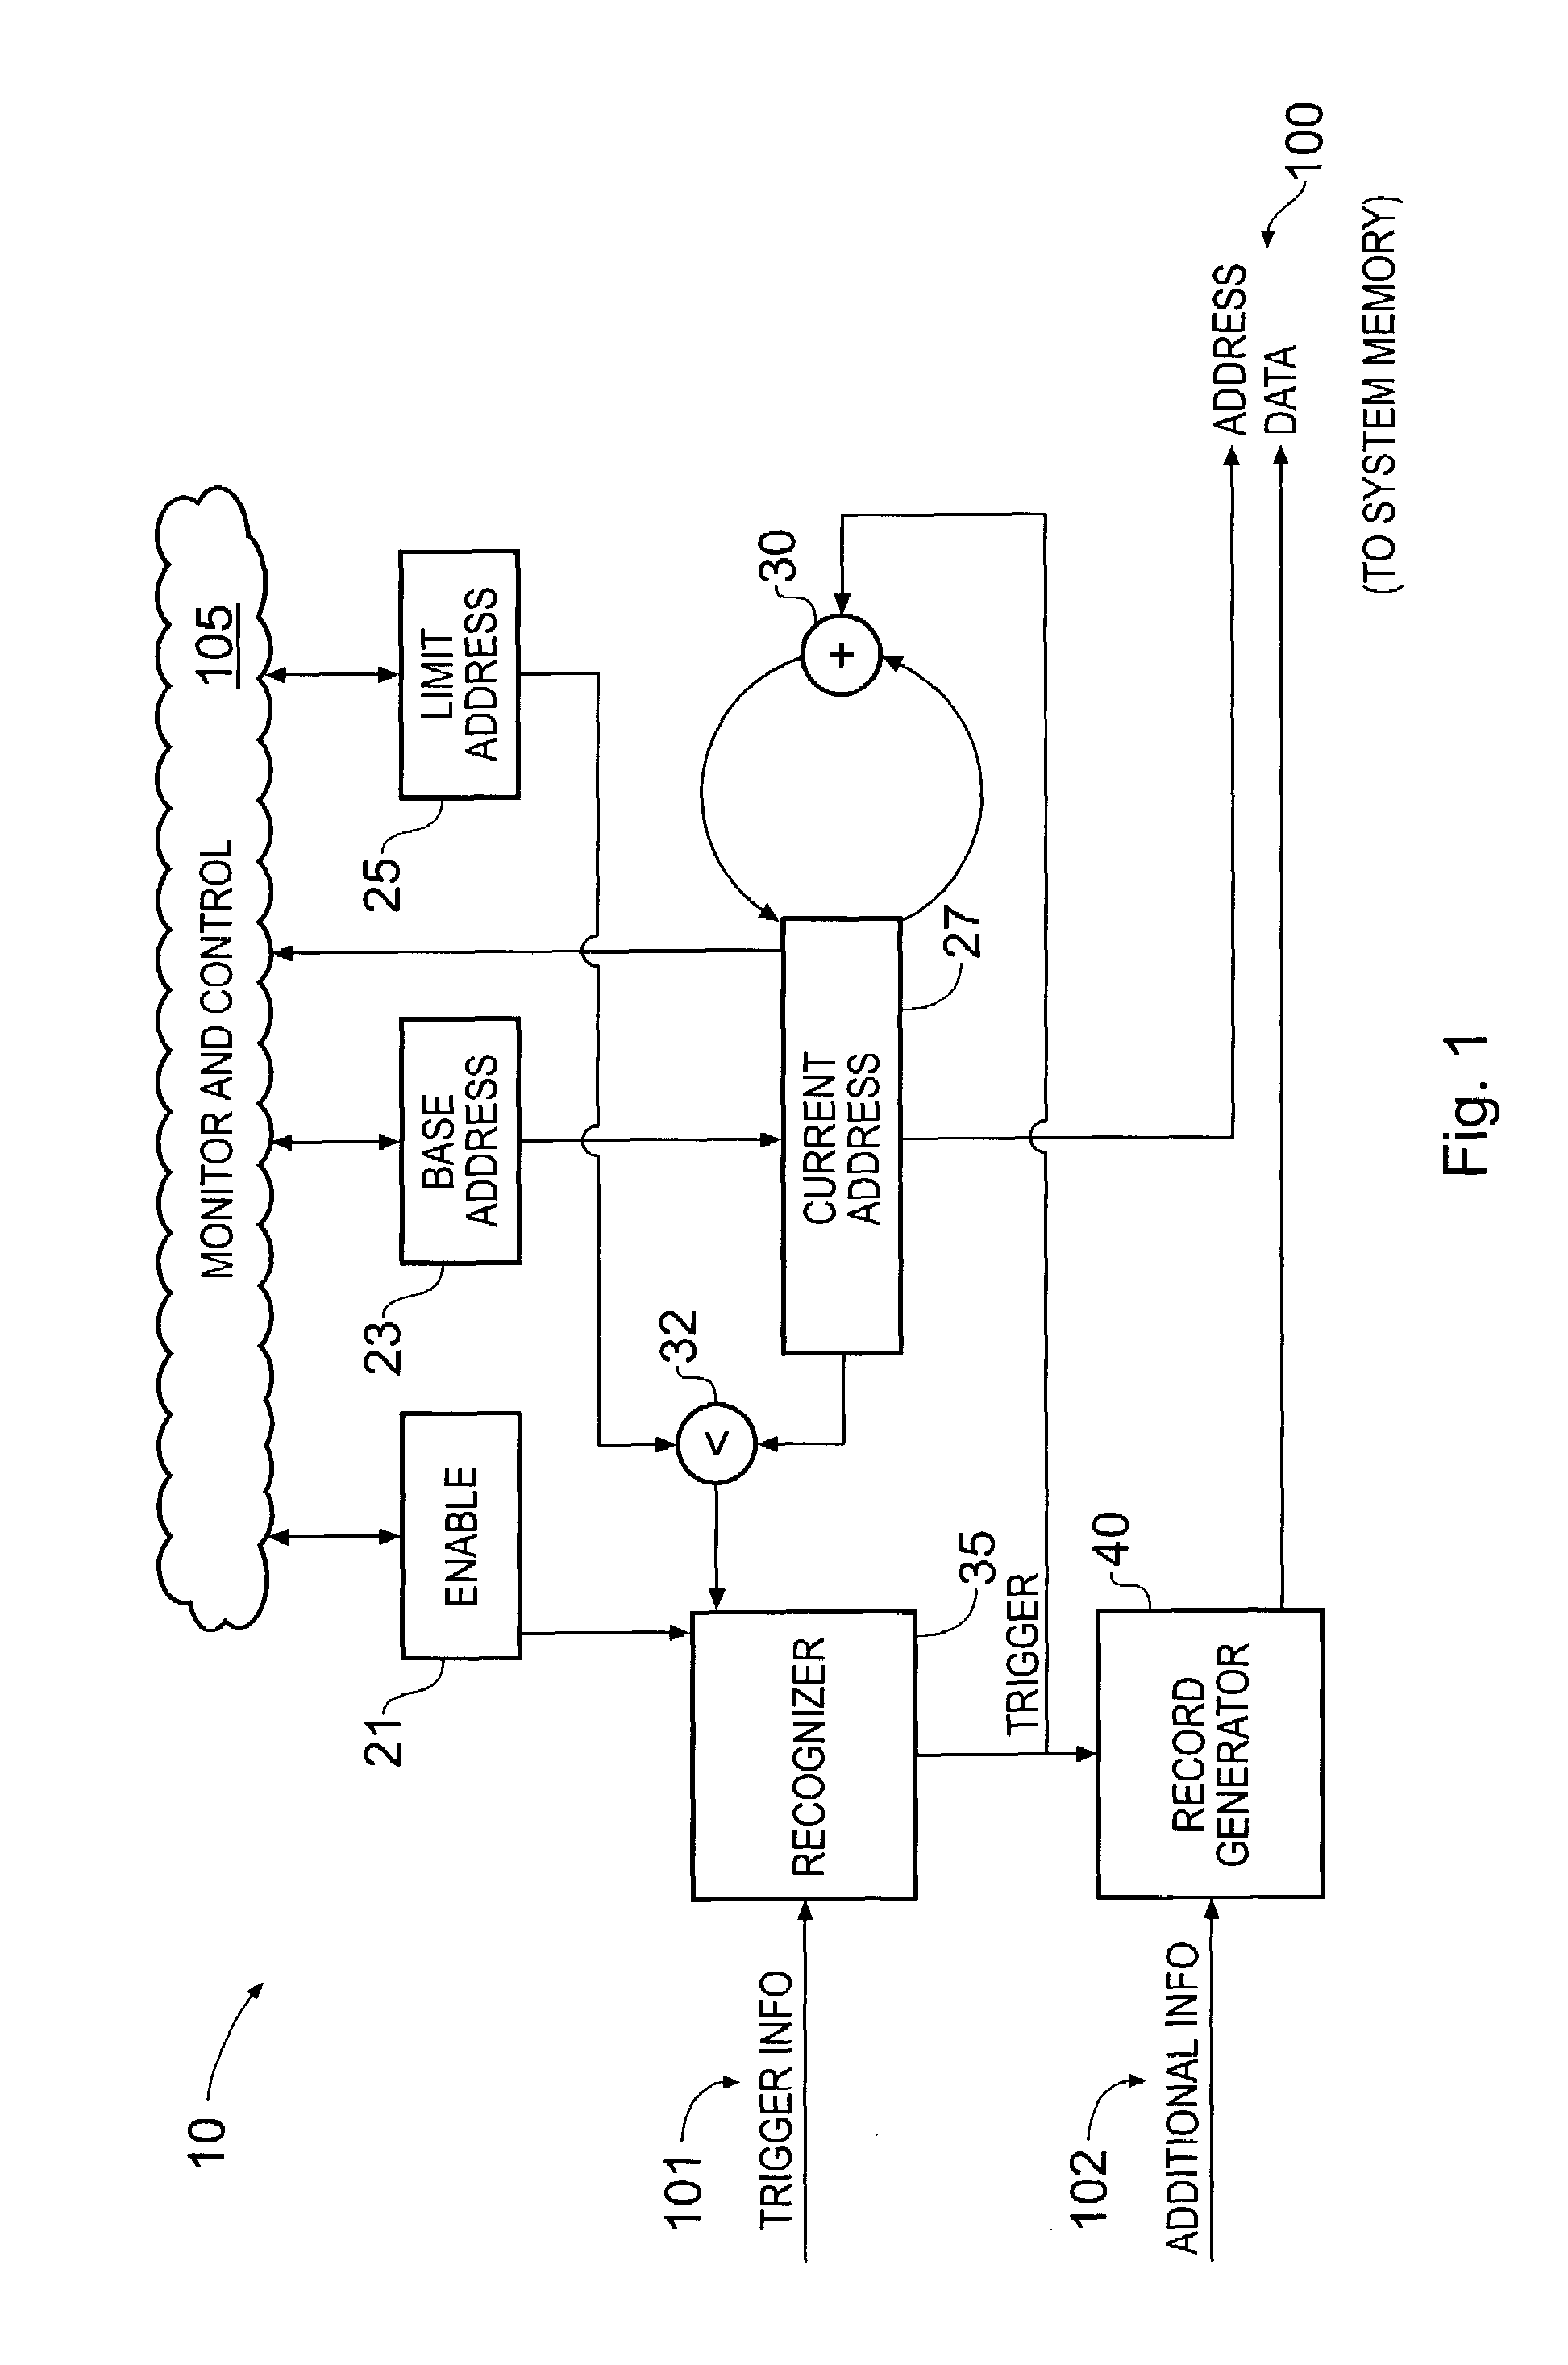 System and method for generating trace data in a computing system